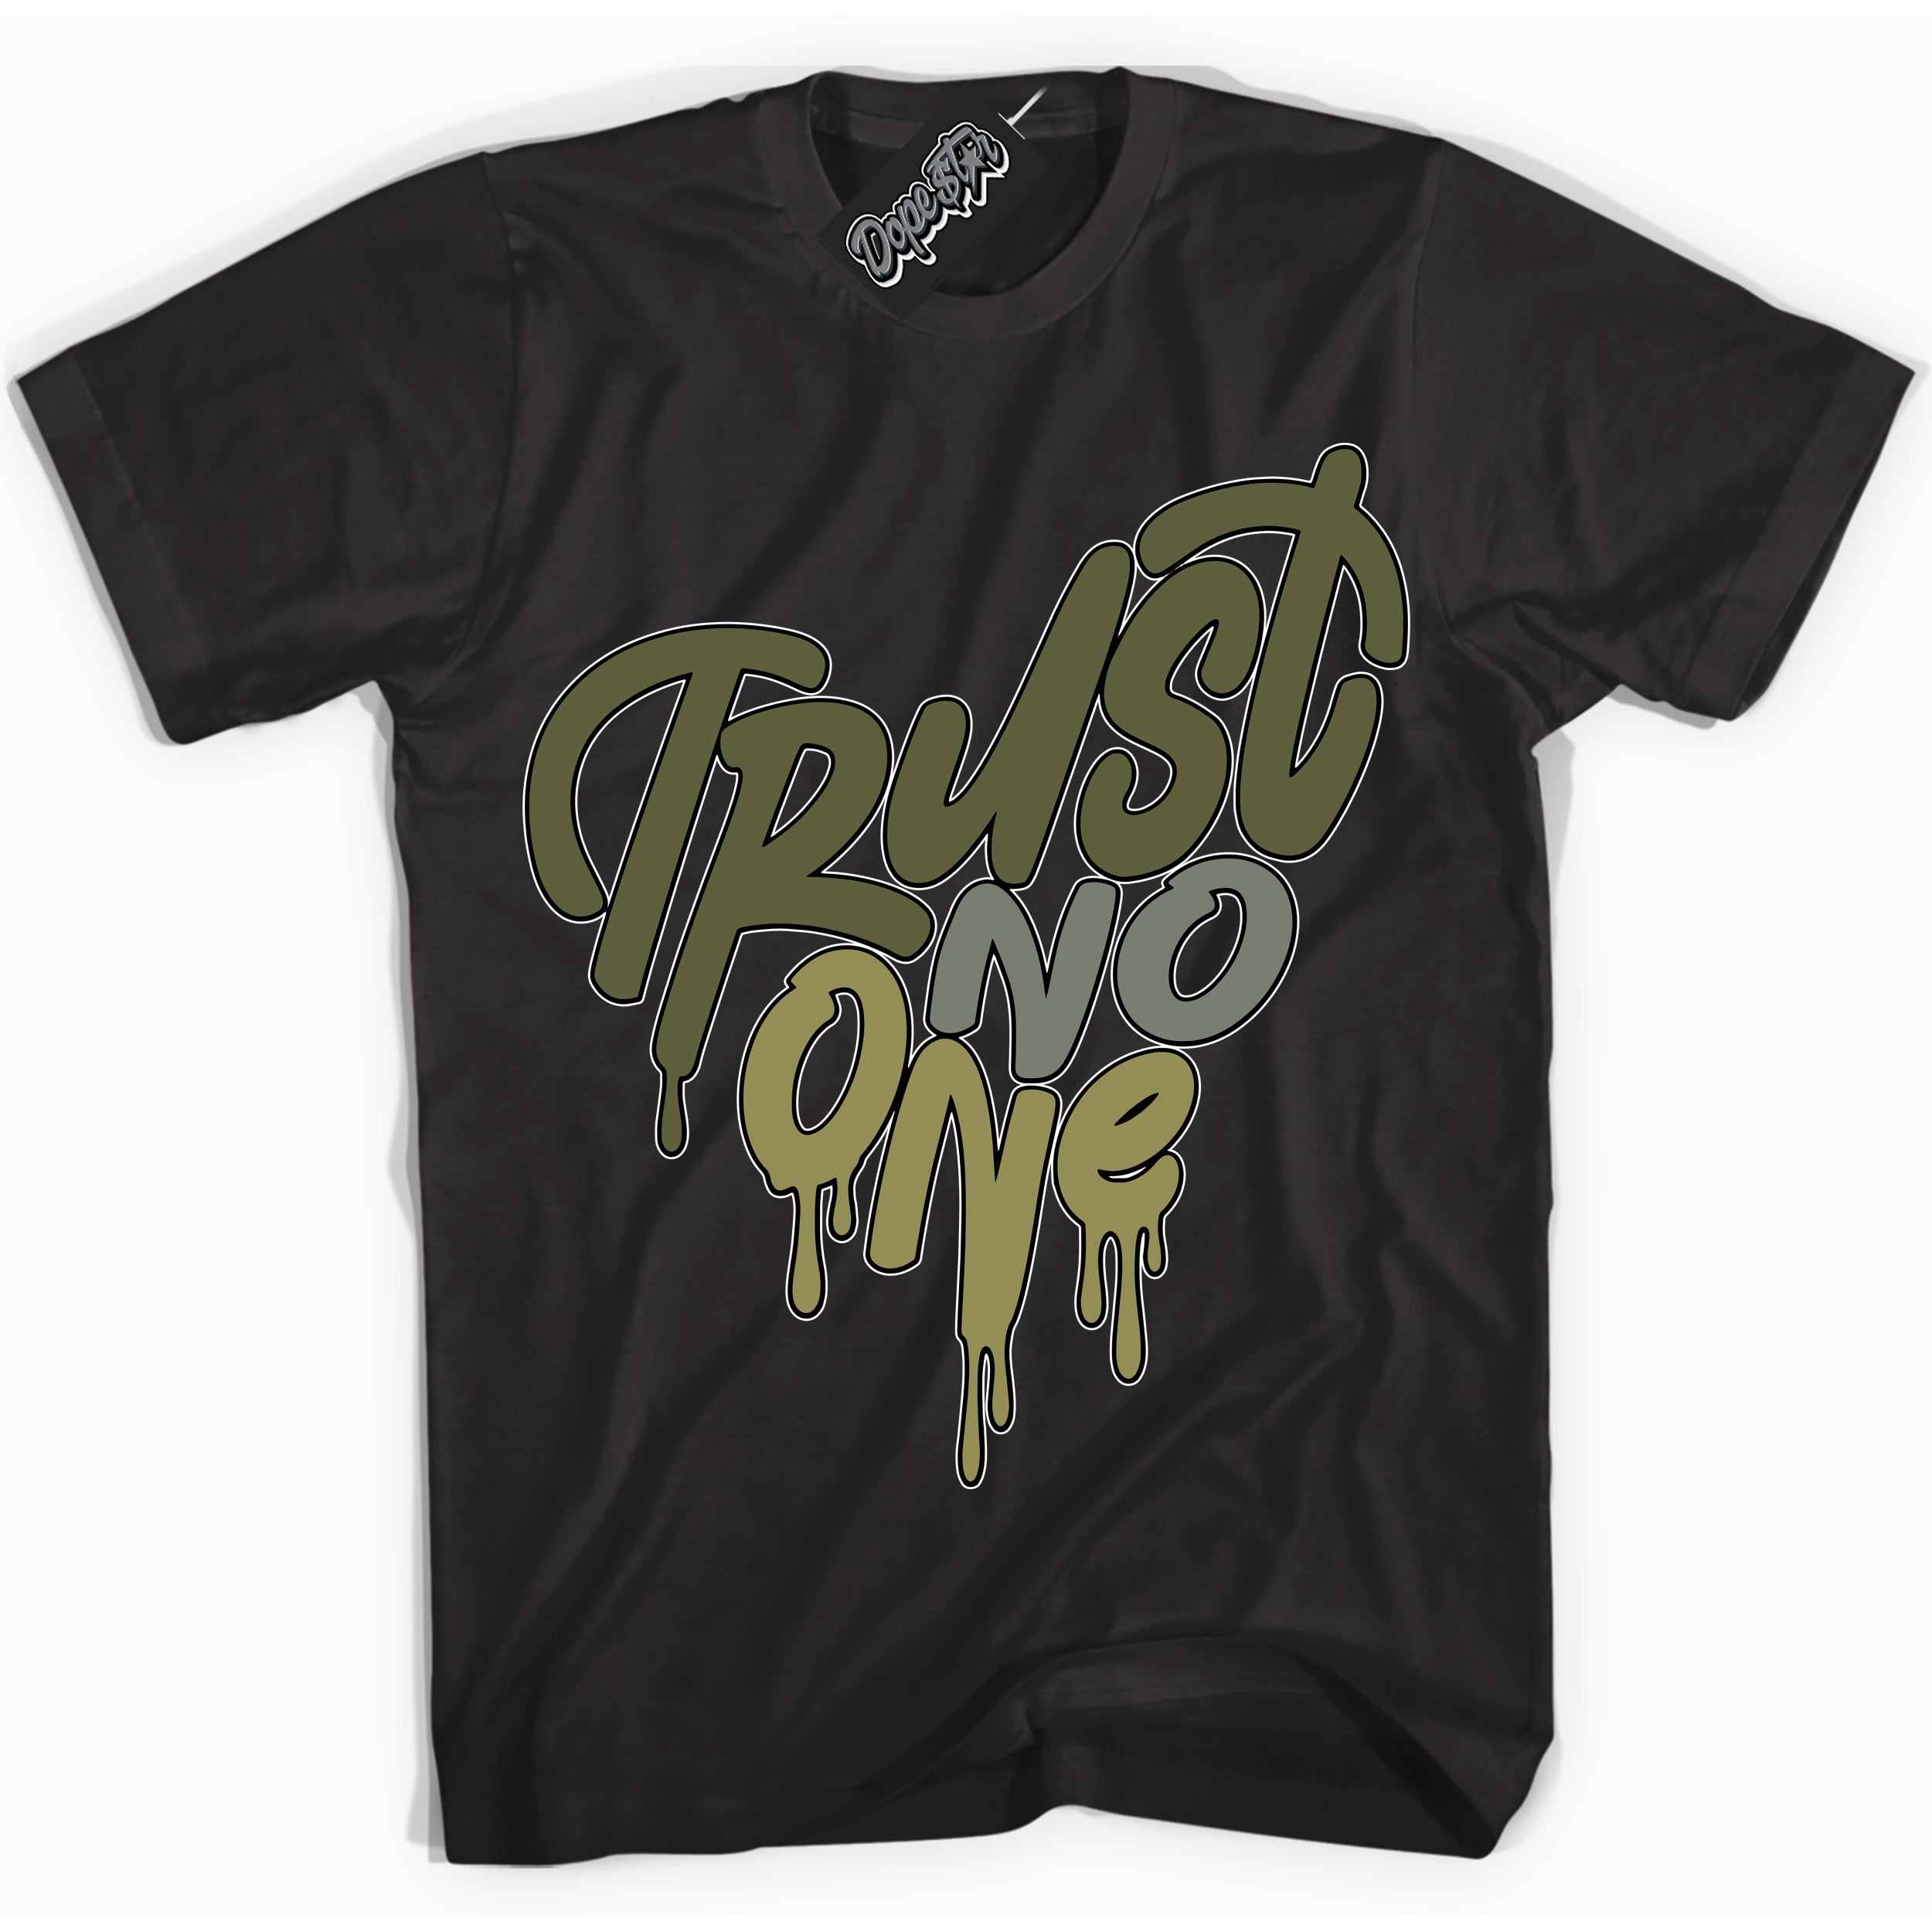 Cool Black graphic tee with “ Trust No One Heart ” print, that perfectly matches Craft Olive 4s sneakers 